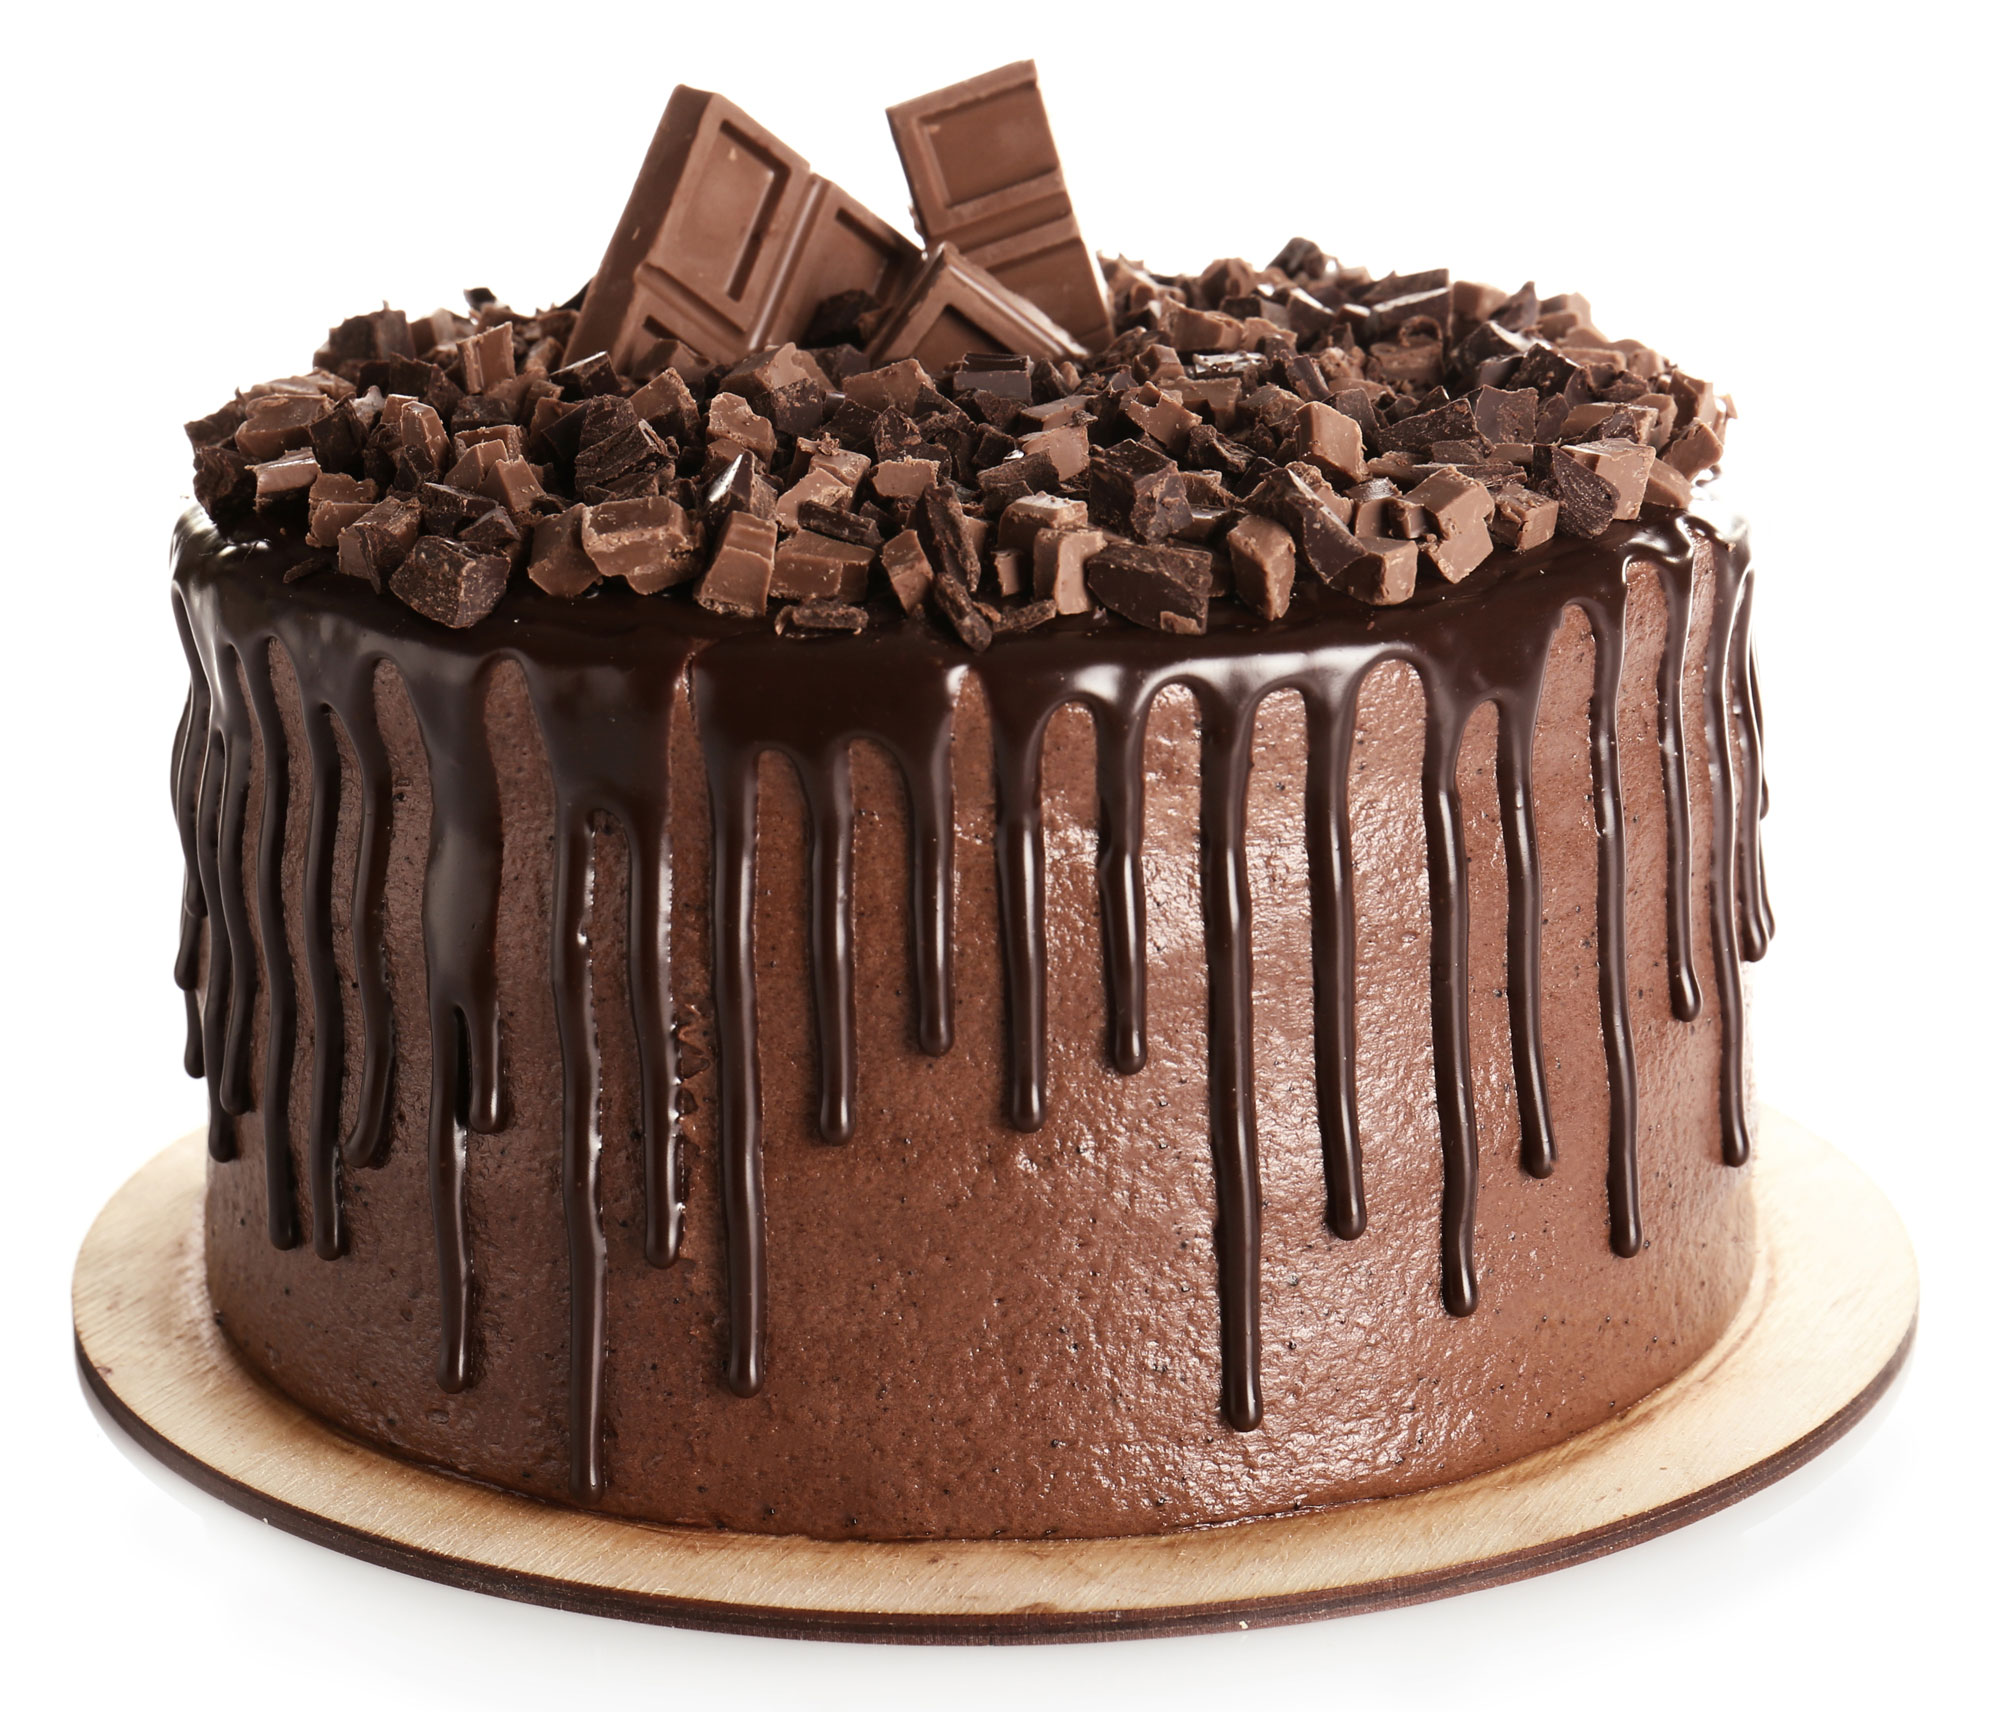 A chocolate cake topped and dripping with chocolate